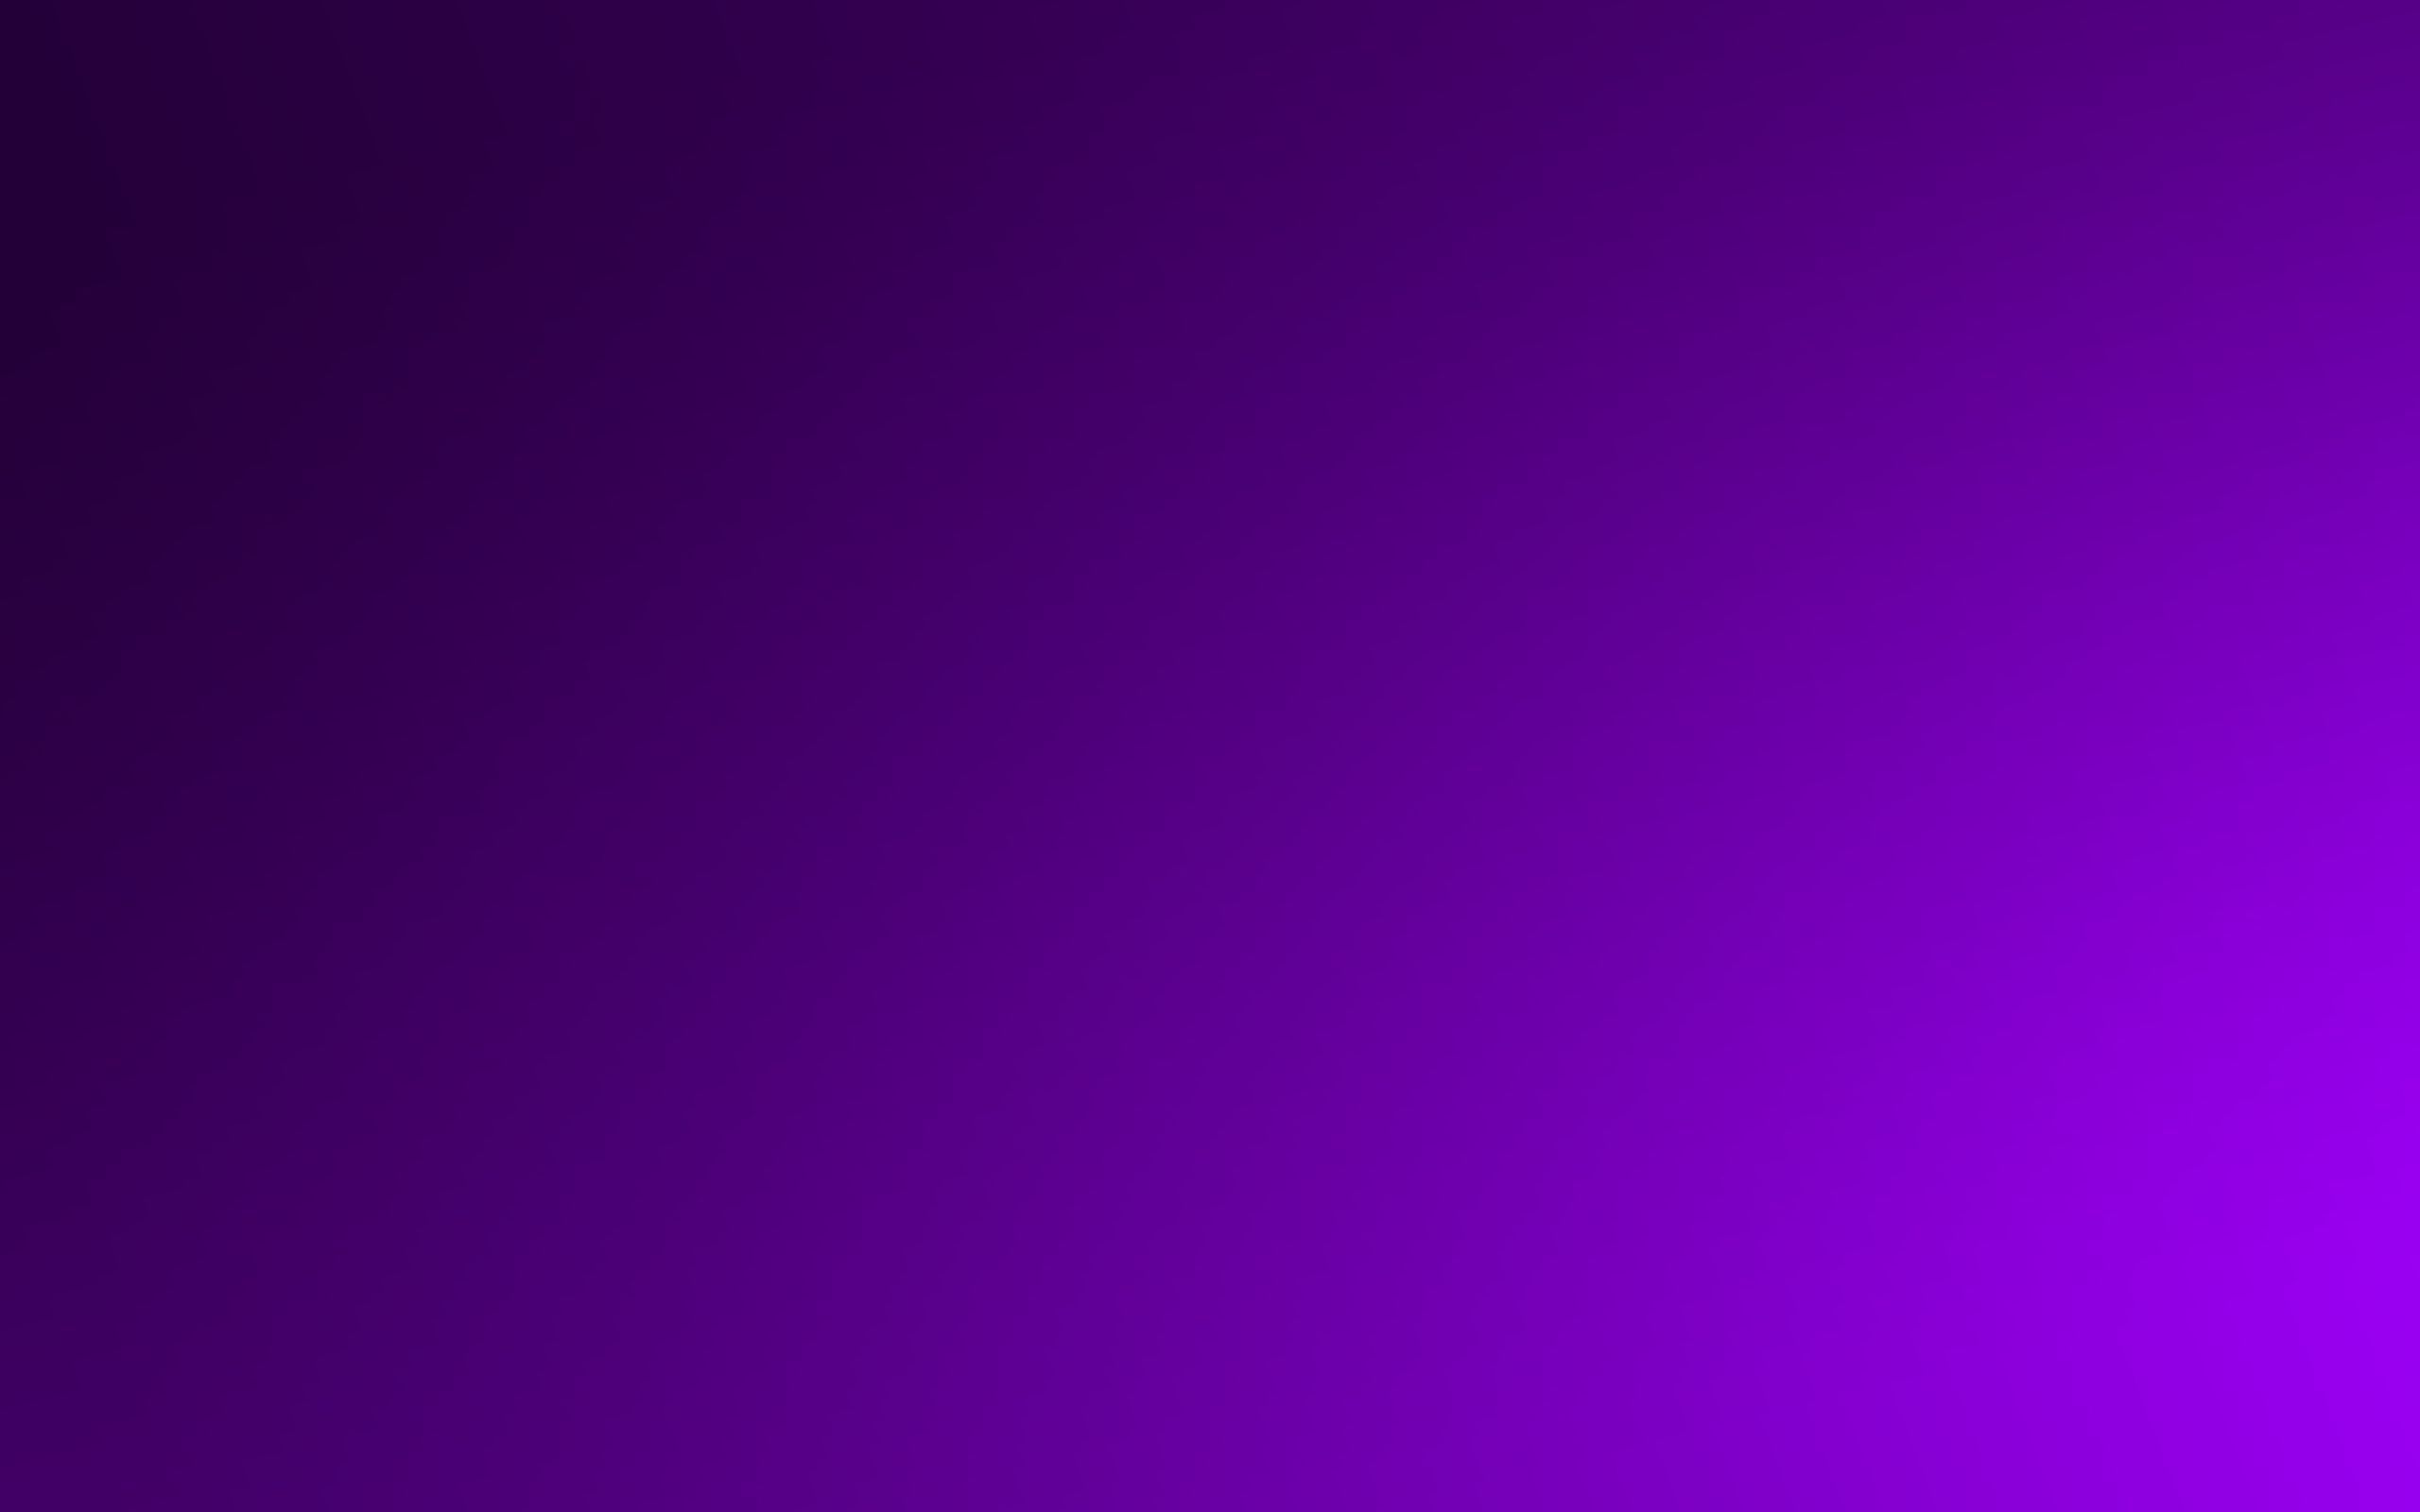 Red And Purple Wallpaper